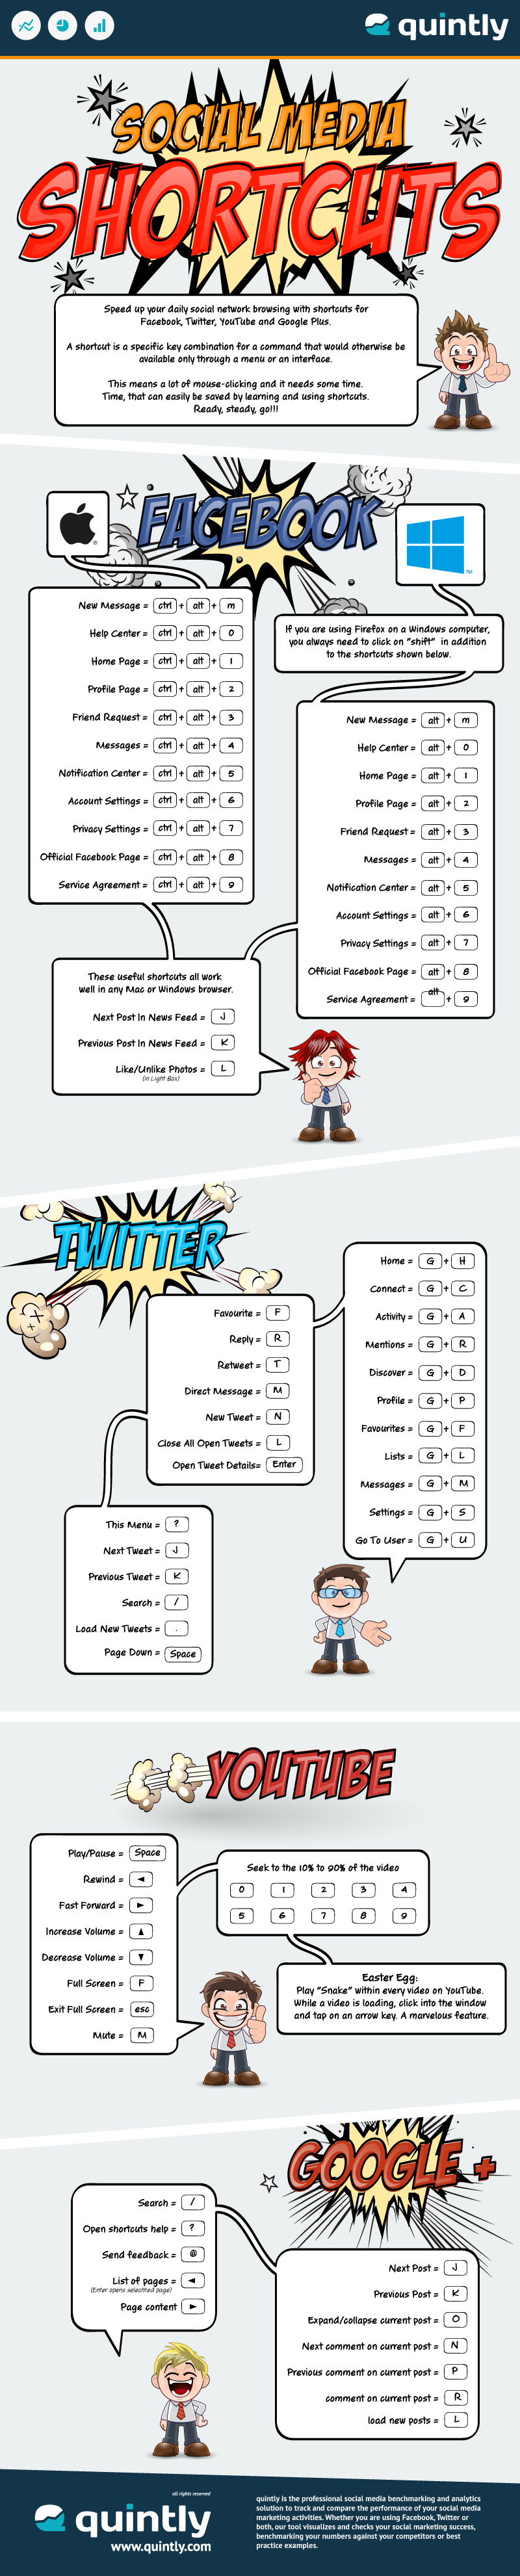 quintly Infographic: Social Media Shortcuts - How To Save Your Time On Social Media Platforms